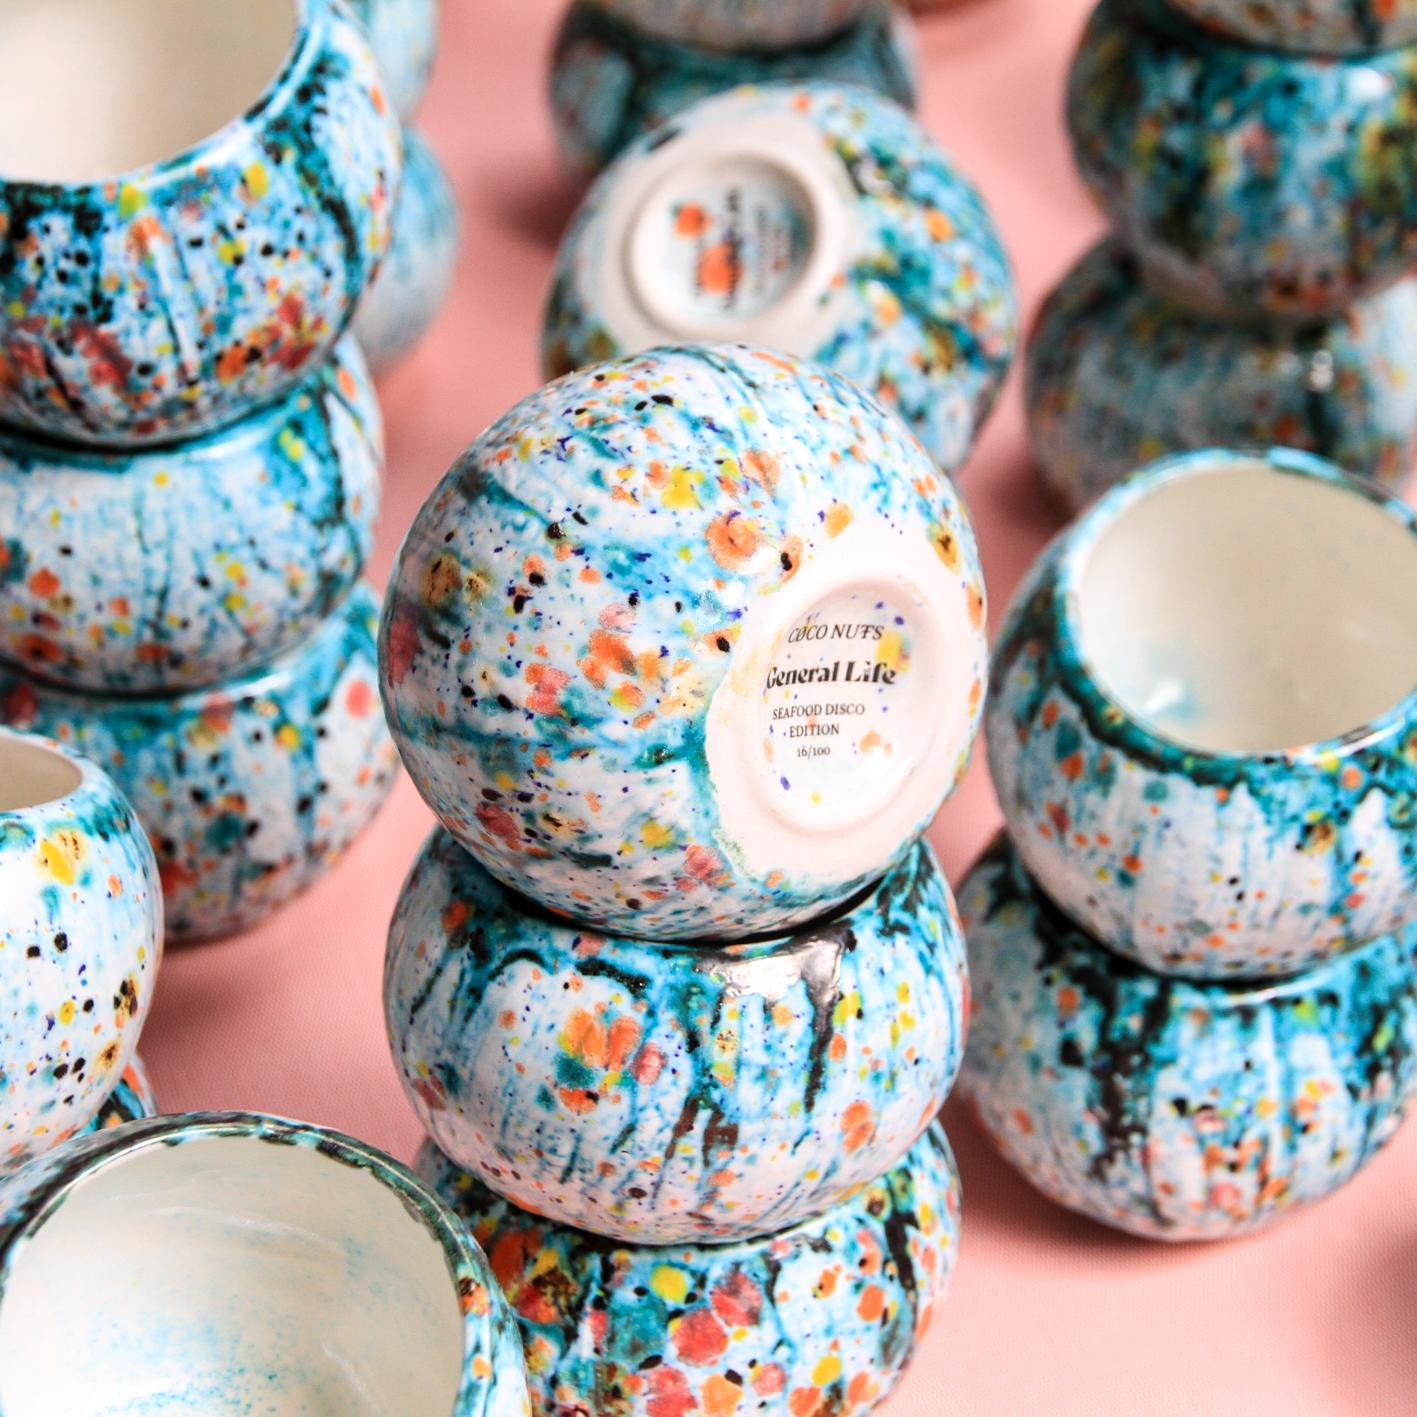 Out of a period of joyful exuberance General Life have created a new limited edition of just 100 of their CØCO NUTS cups in a new ‘SEAFØØD DISCO’ glaze inspired by nougat, prawns, art nouveau, cheetahs and Argentinian street art. These are tactile